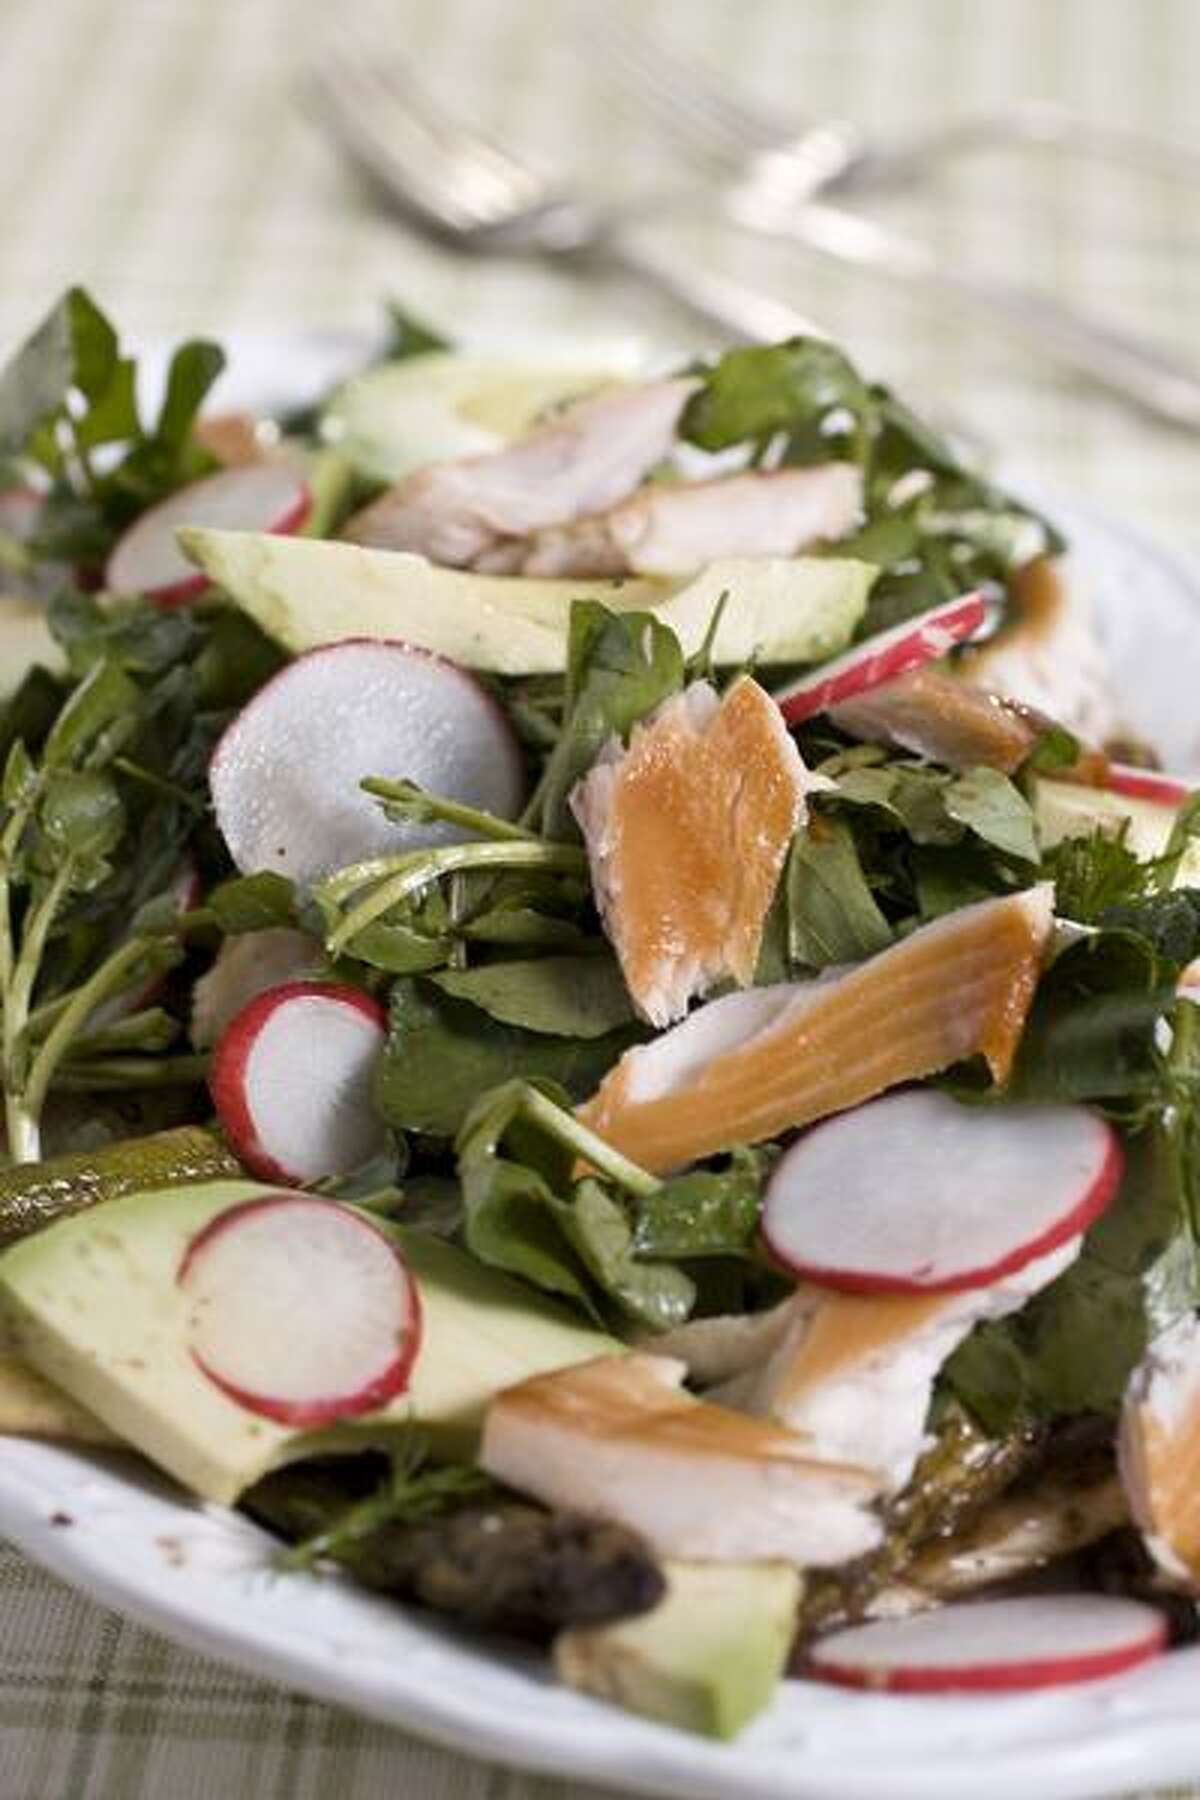 Larry Crowe/Associated Press photo: Marinated Spring Vegetables and Smoked Trout Salad